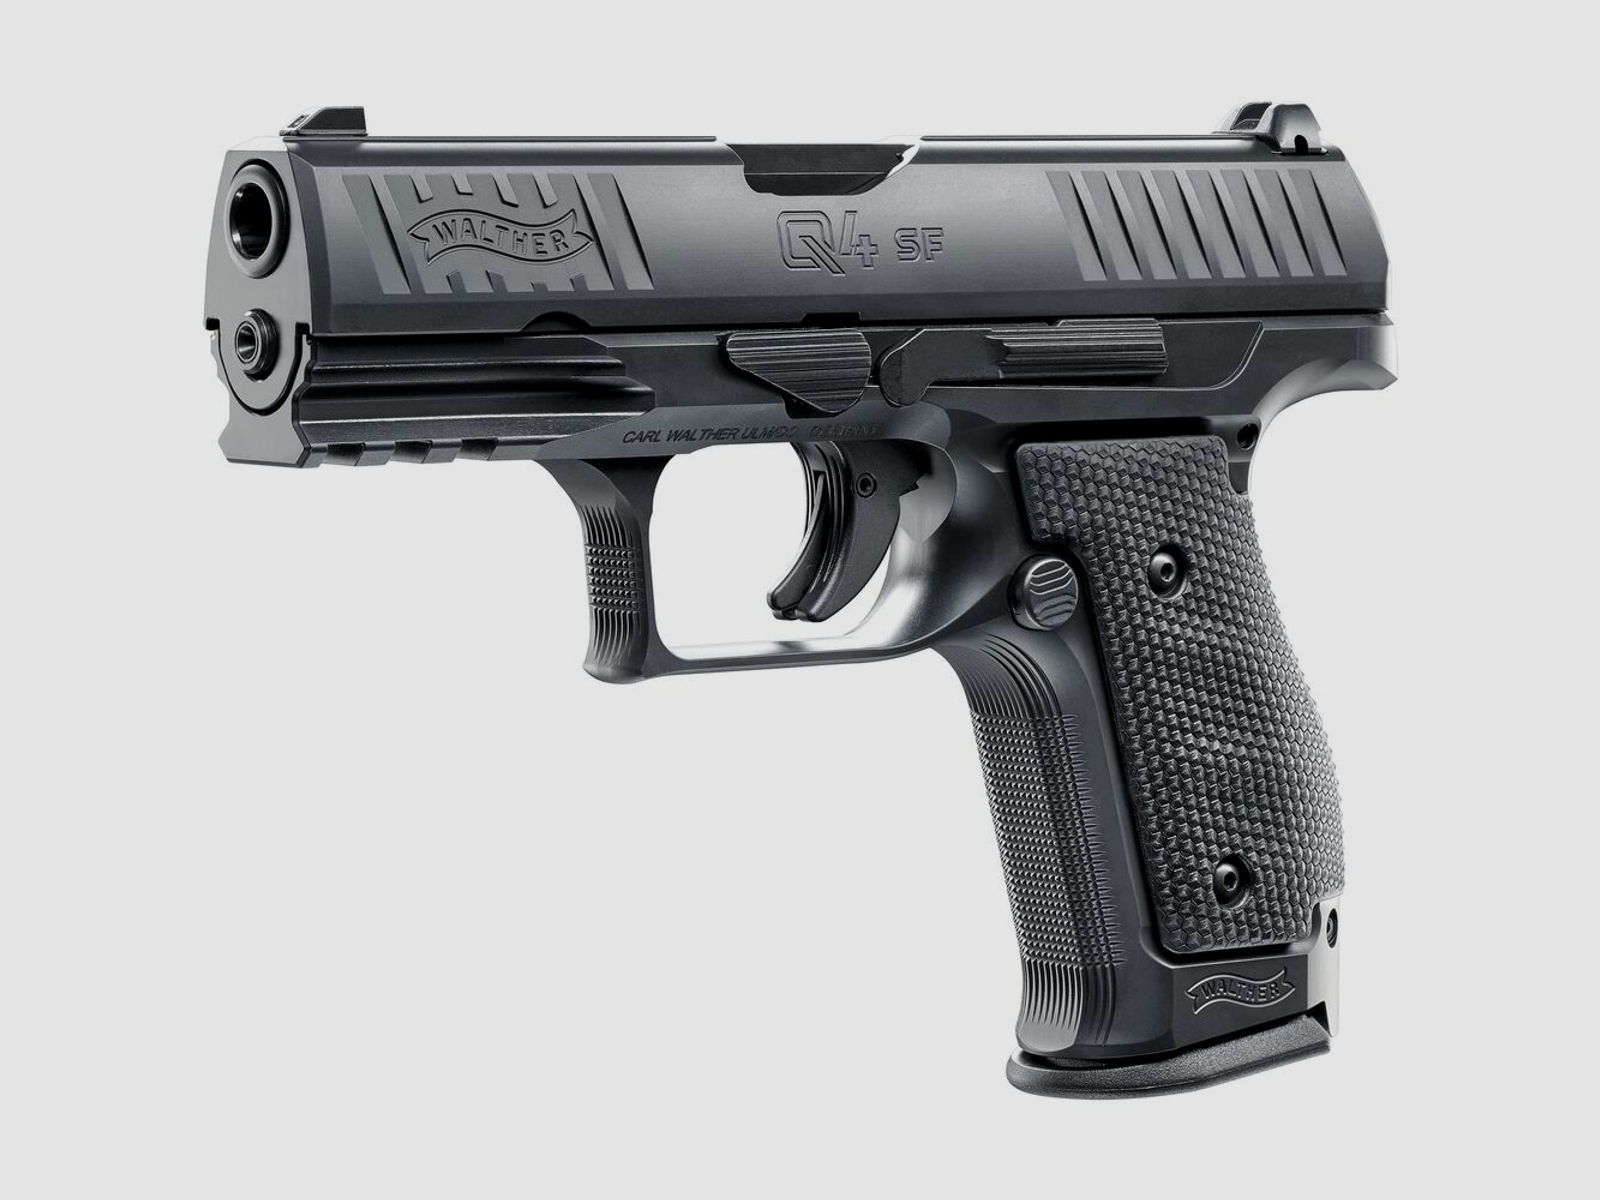 Walther	 Q4 SF PS INT- Vorführware 9 mm Luger Pistole